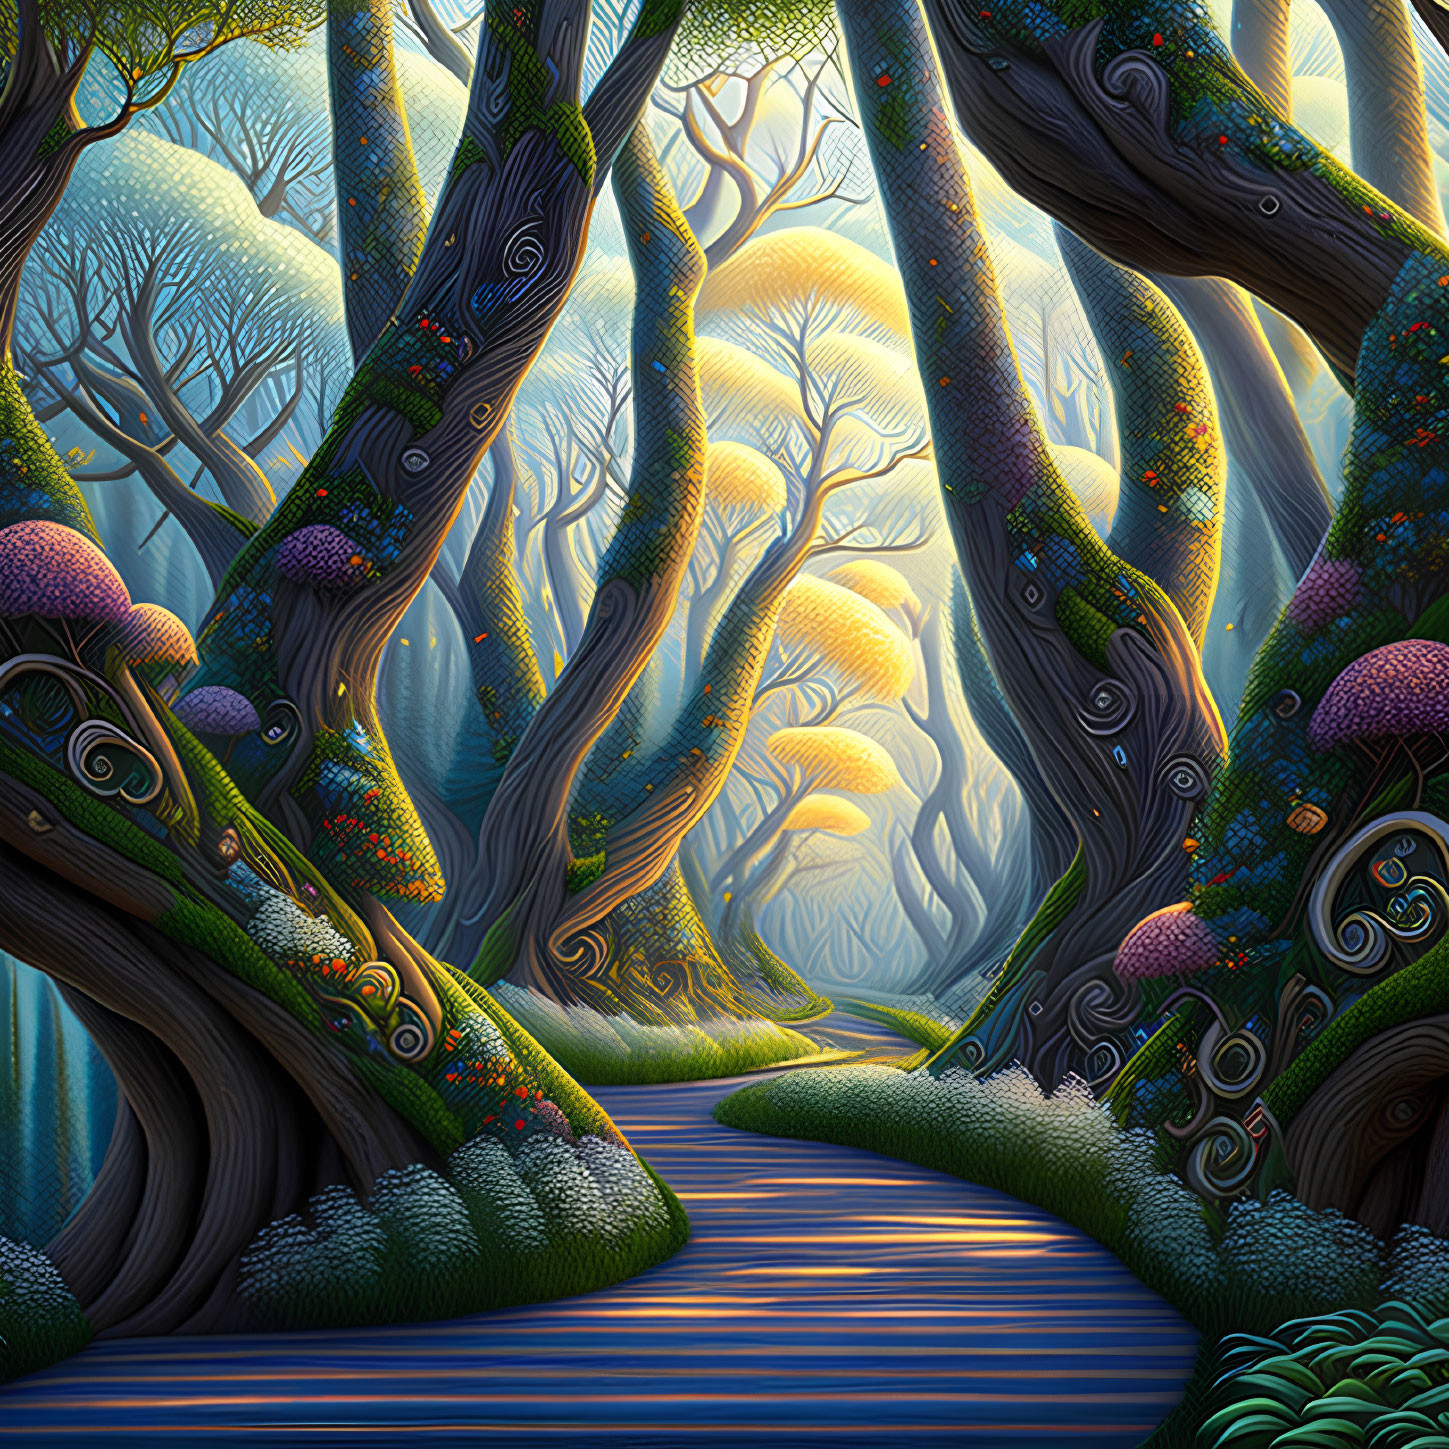 Enchanted forest with twisted trees, cobblestone path, blooming flowers, and luminous